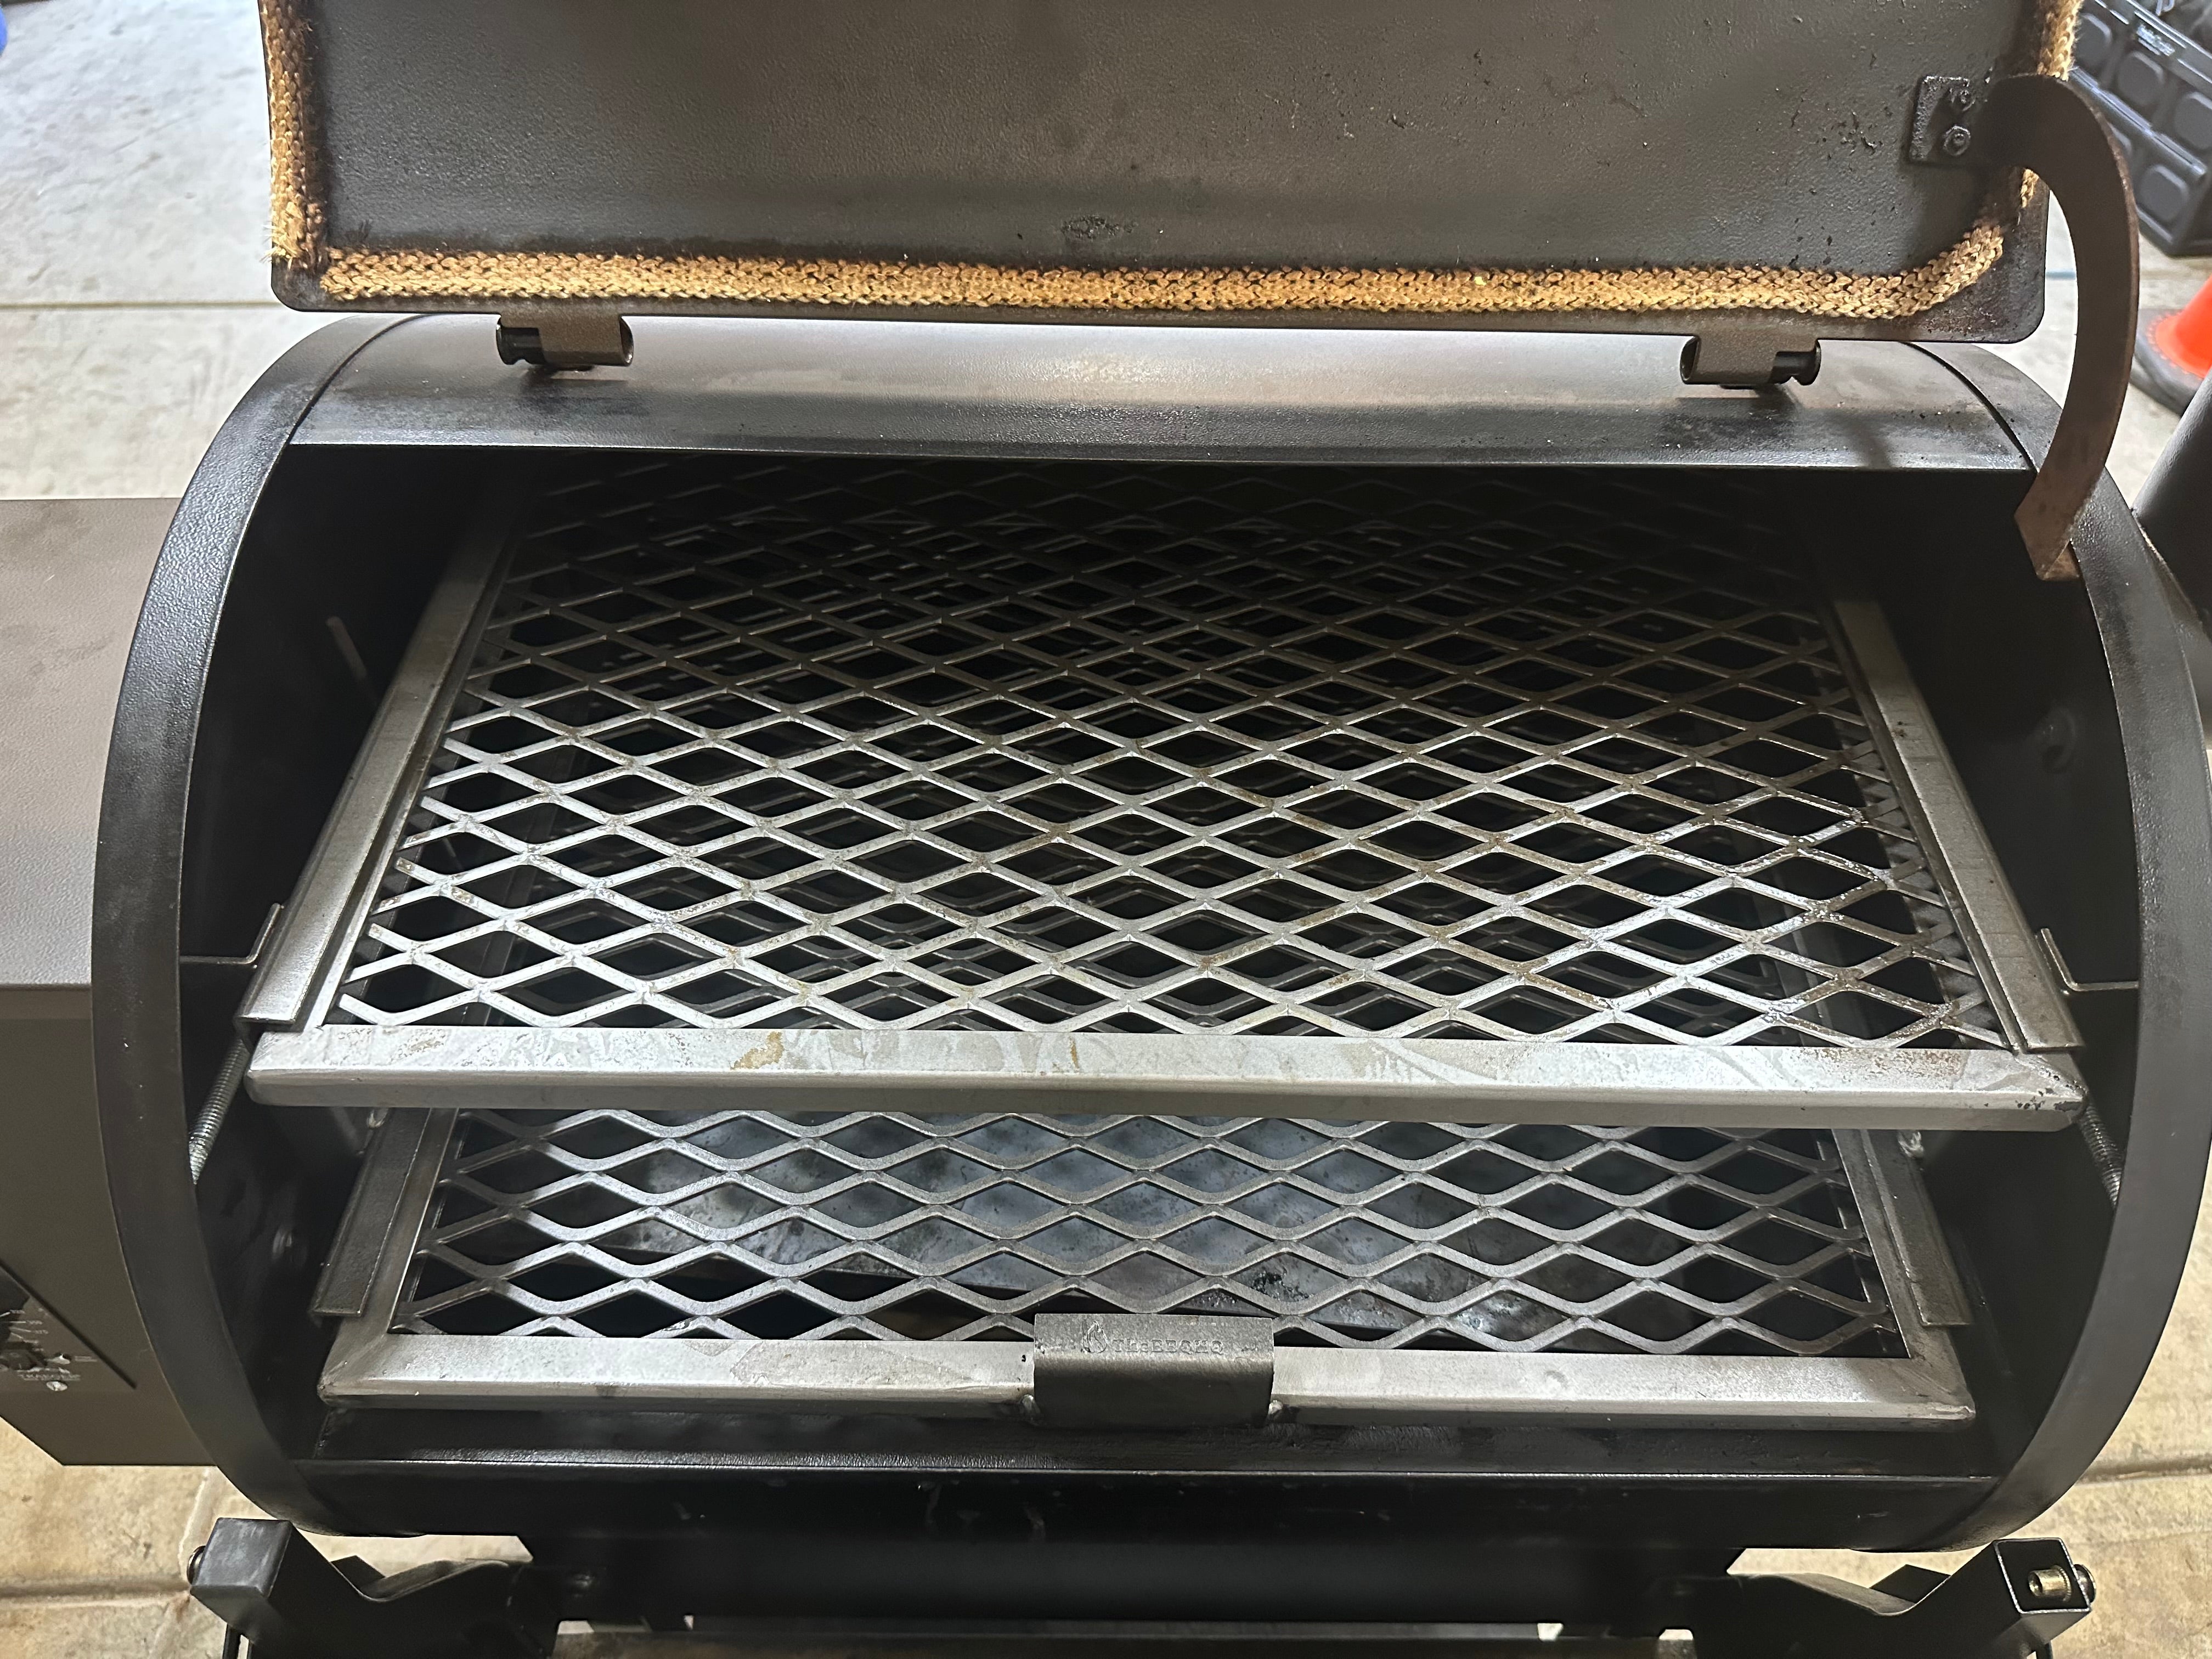 TheBBQHQ Ultimate Grate System for Pro 22 and Pro 575 Traeger Smokers